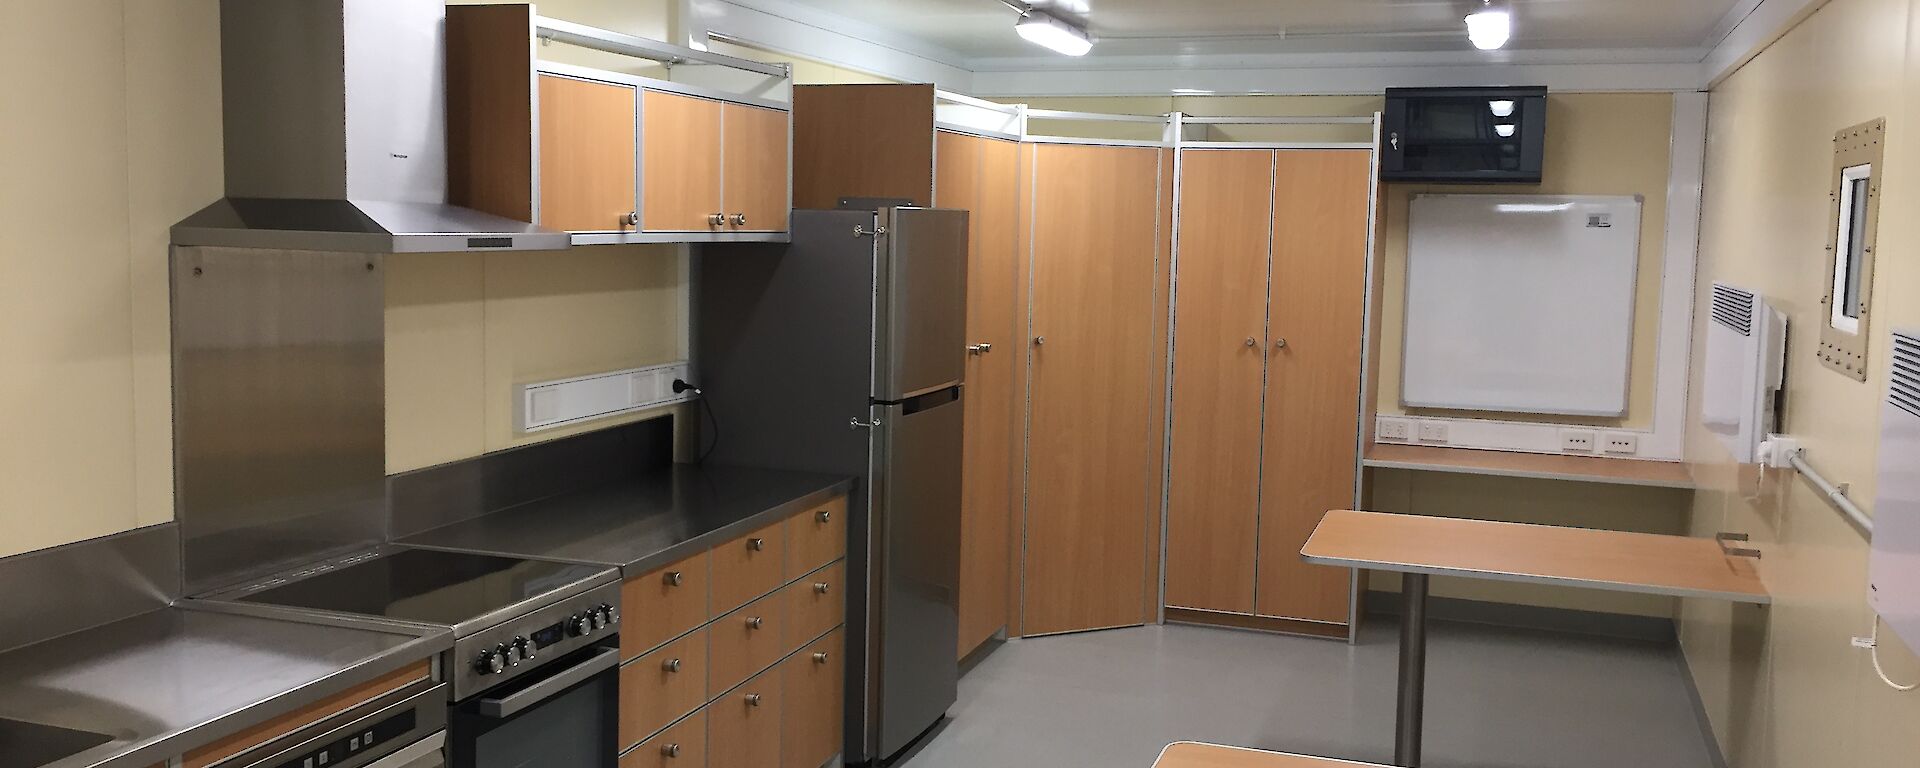 View of the kitchen in the traverse dining/living van, showing stainless steel appliances, cupboards and two dining tables.